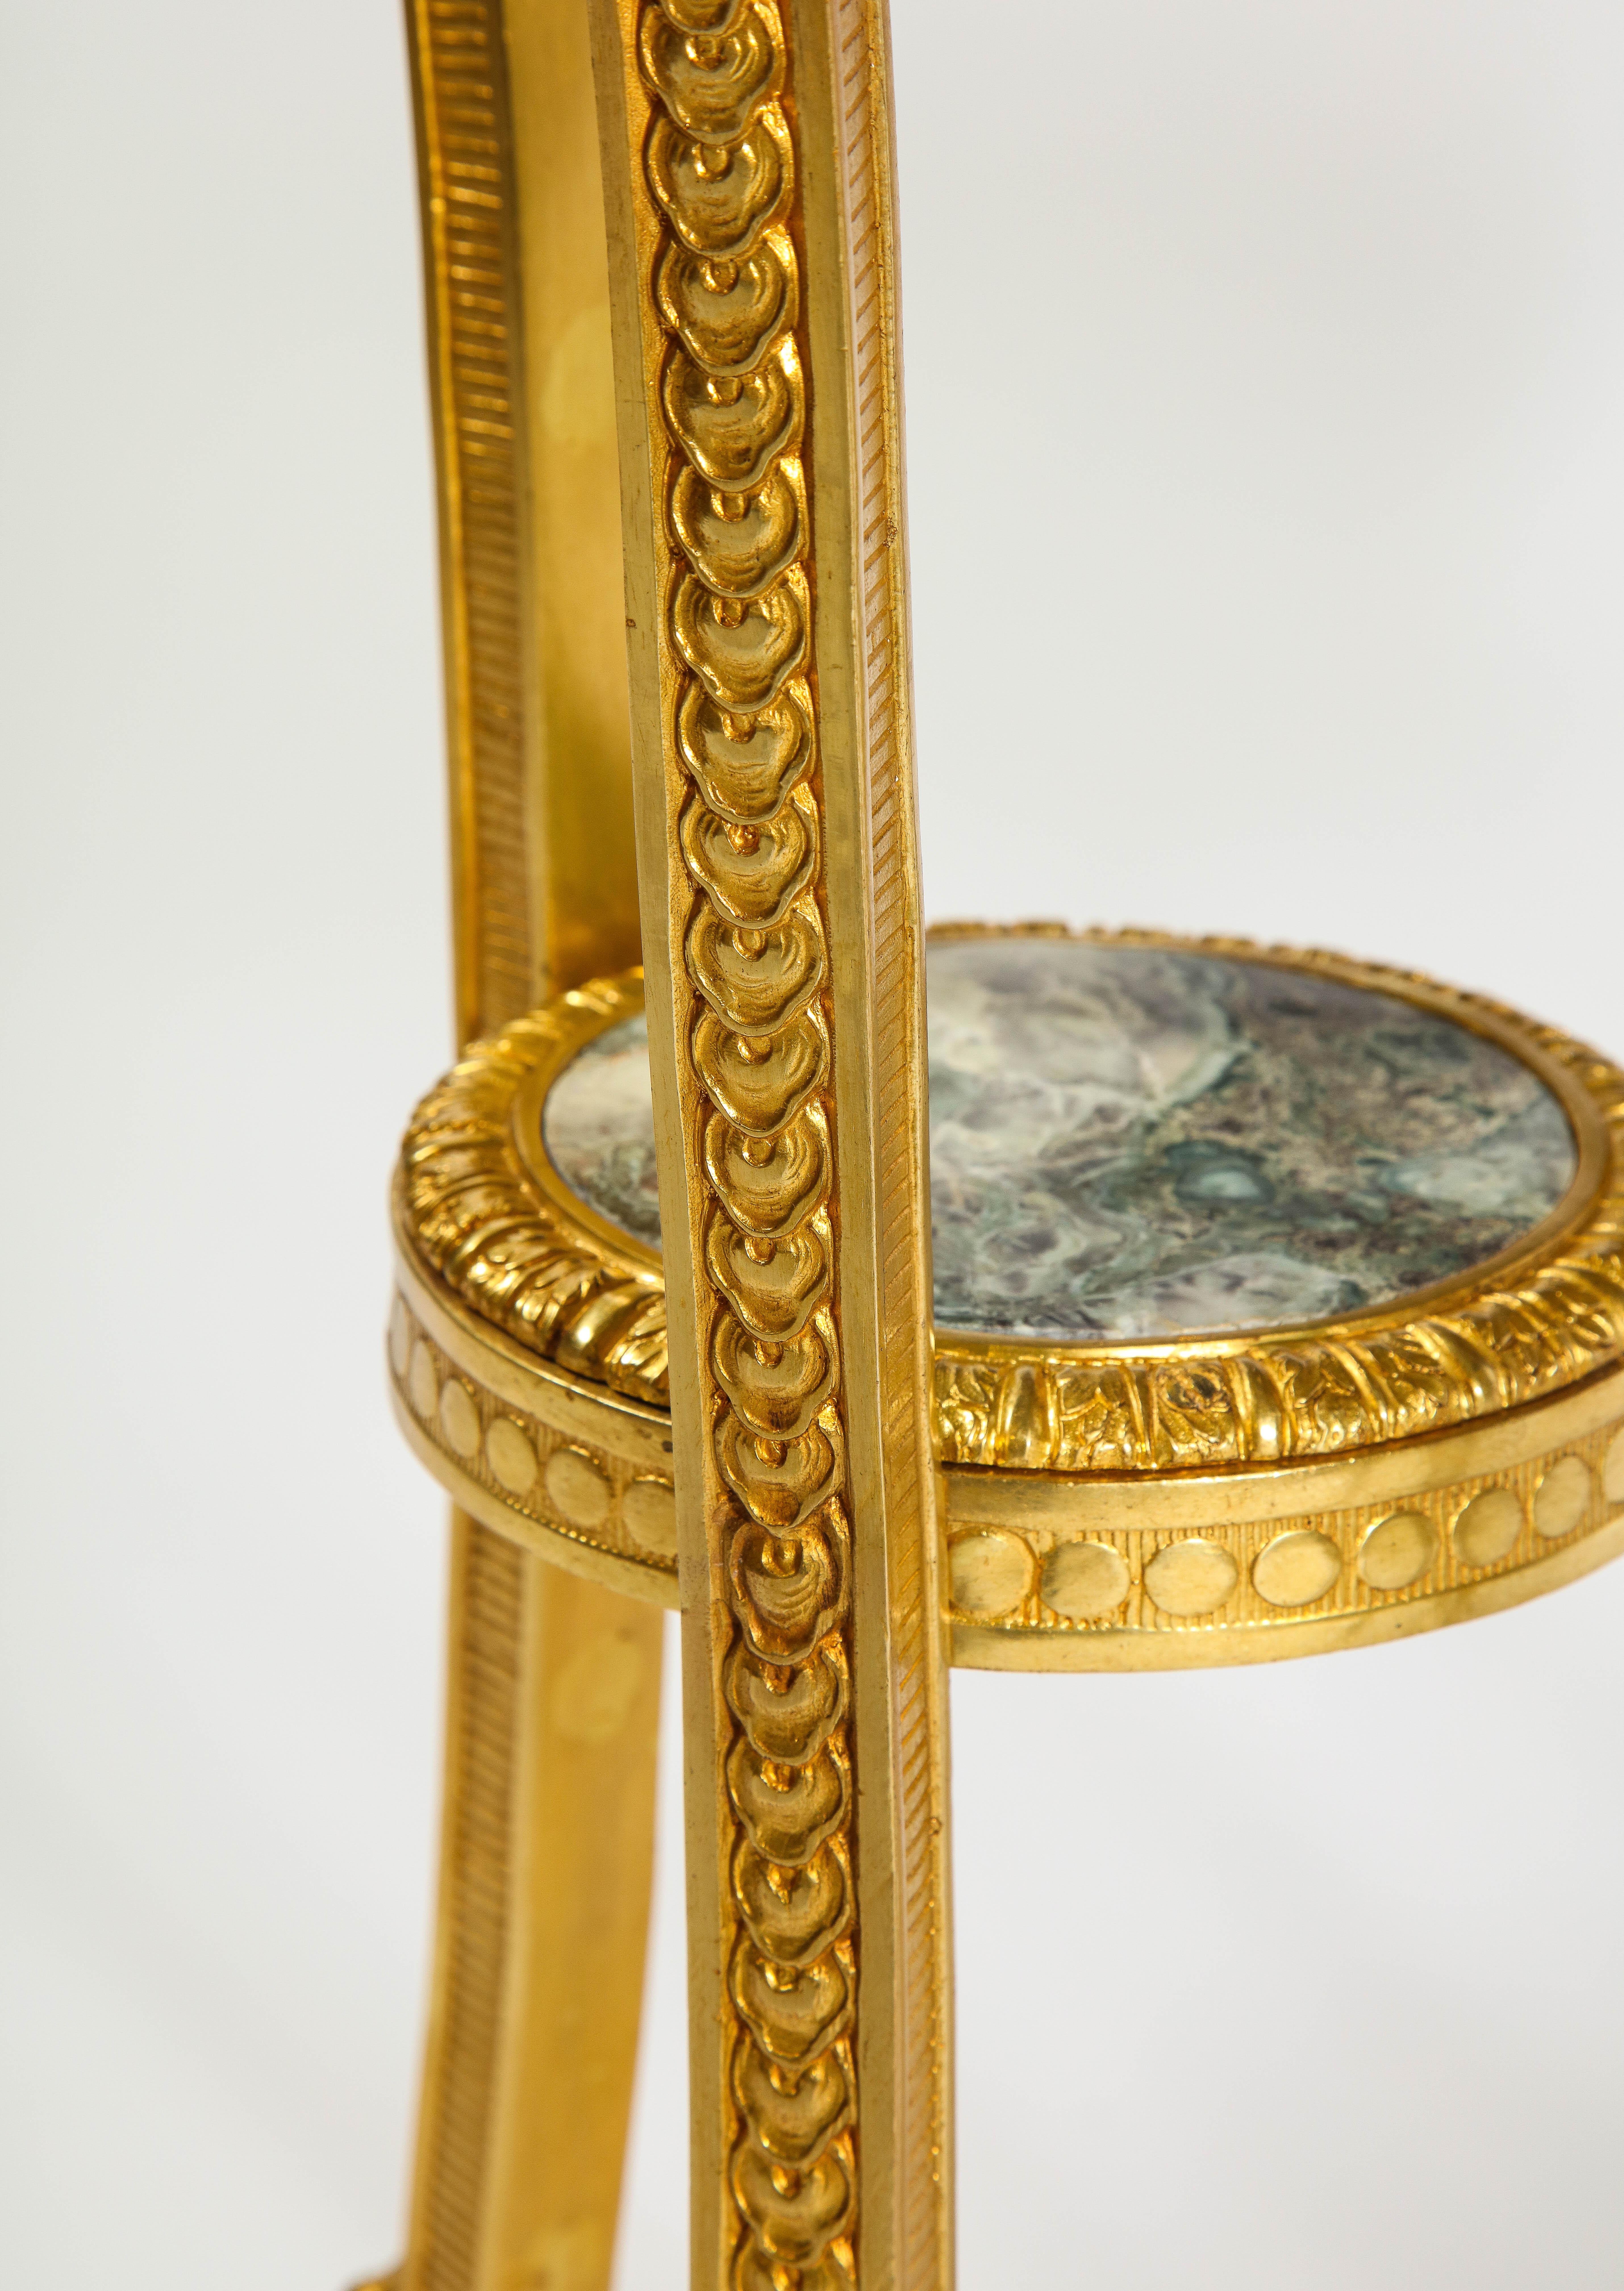 Early 20th Century Pair of Russian Neoclassical Style Gilt Bronze and Marble-Top Guéridons